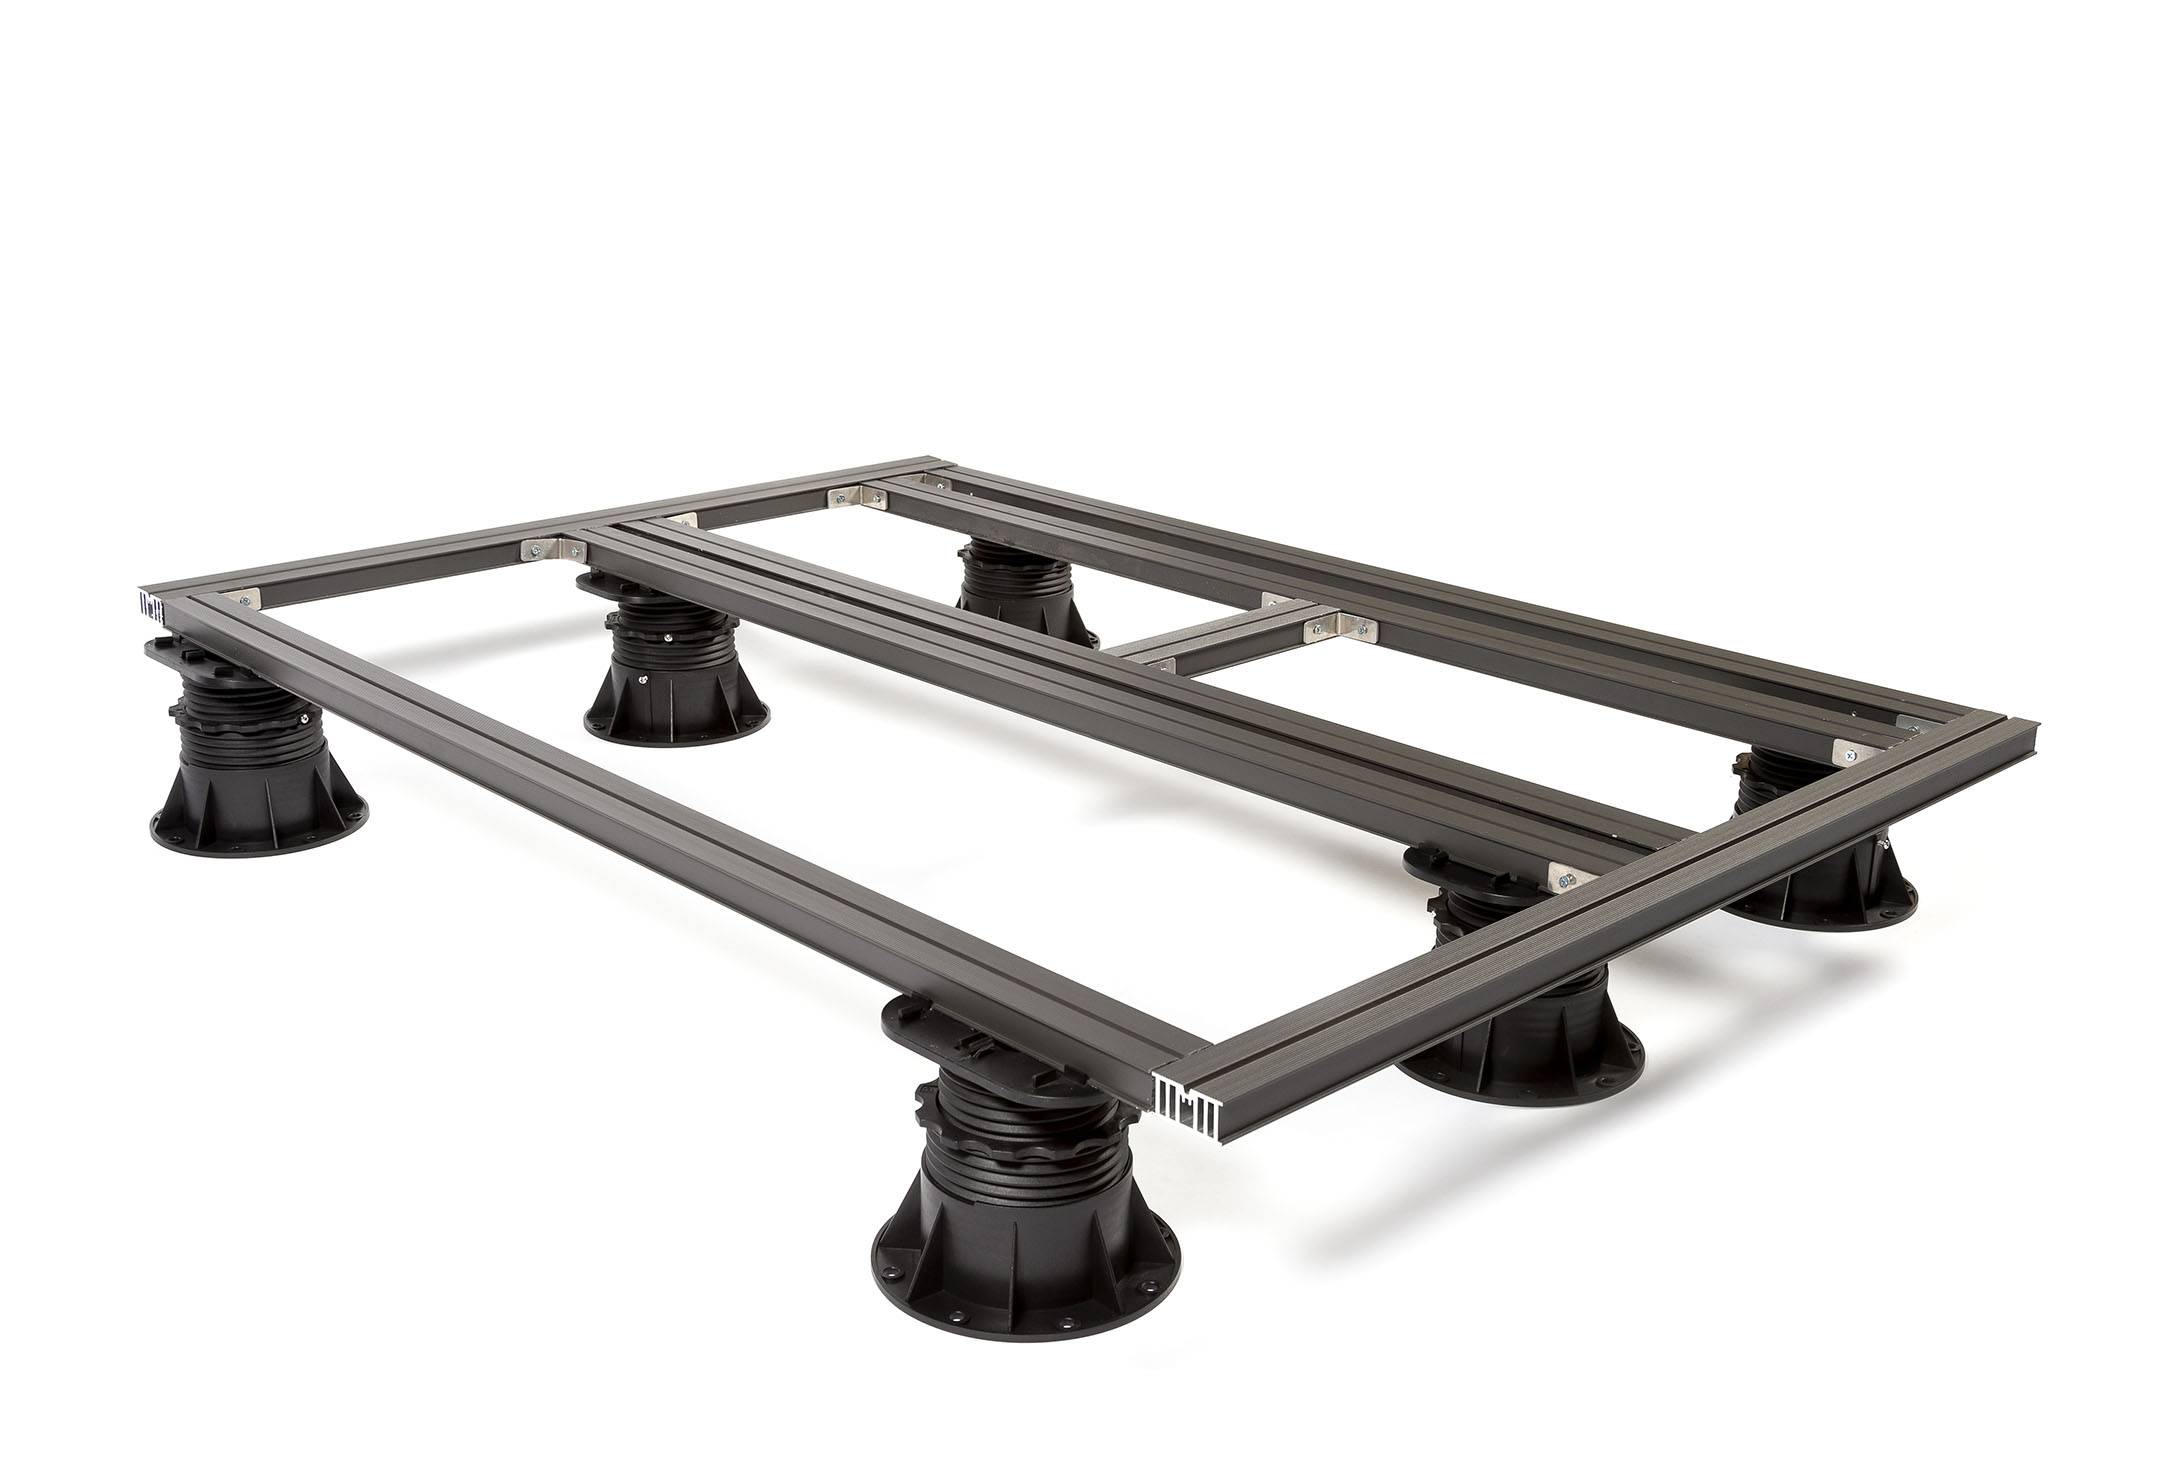 Class B Fire Resistant Subframe System - Joists and Pedestals